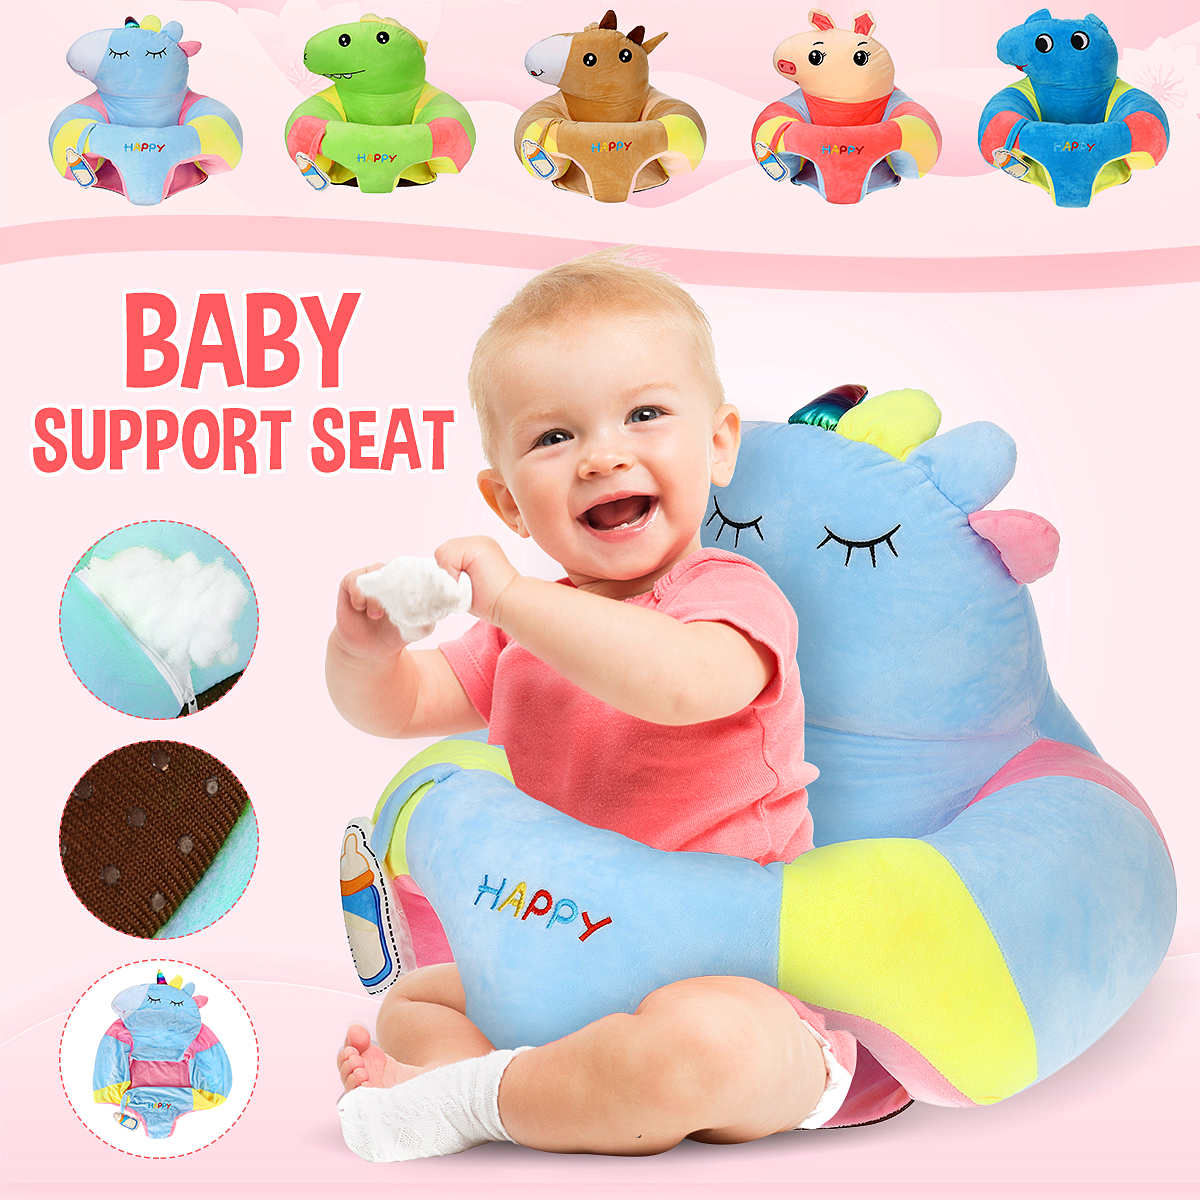 Multi-Style-Kids-Baby-Support-Seats-Sit-Up-Soft-Chair-Sofa-Cartoon-Animal-Kids-Learning-To-Sit-Plush-1817560-2